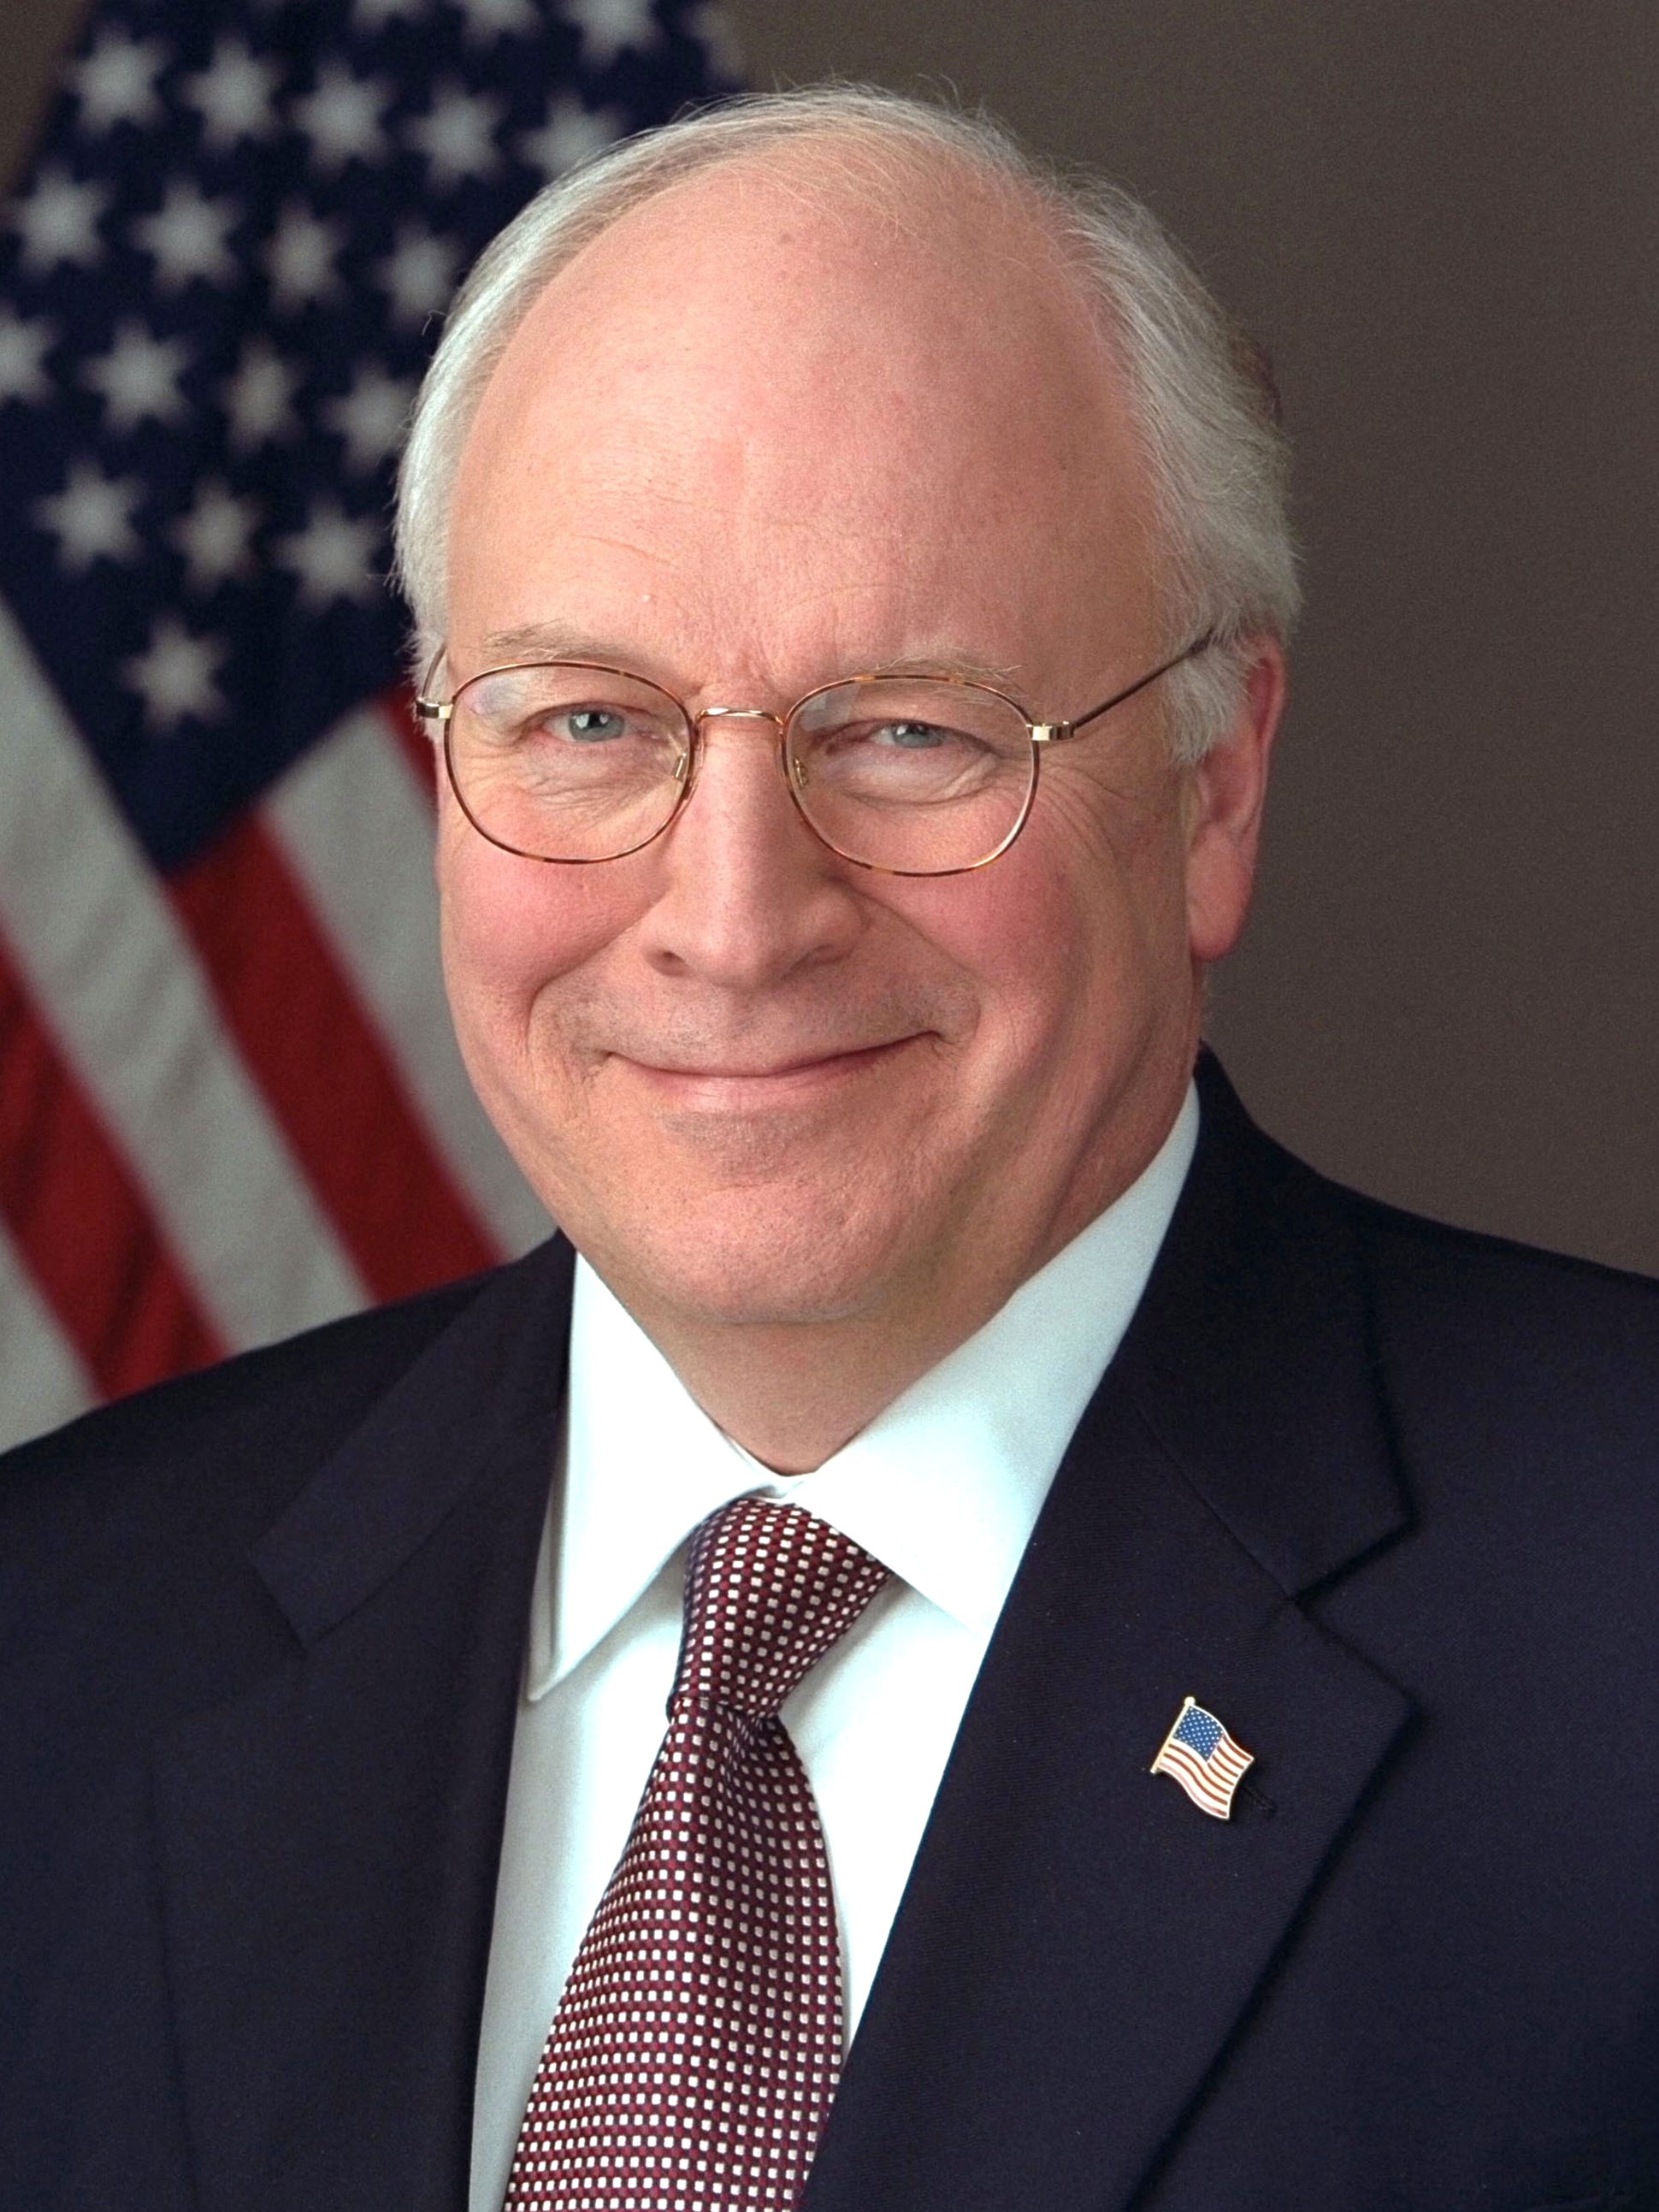 Dick cheney pic